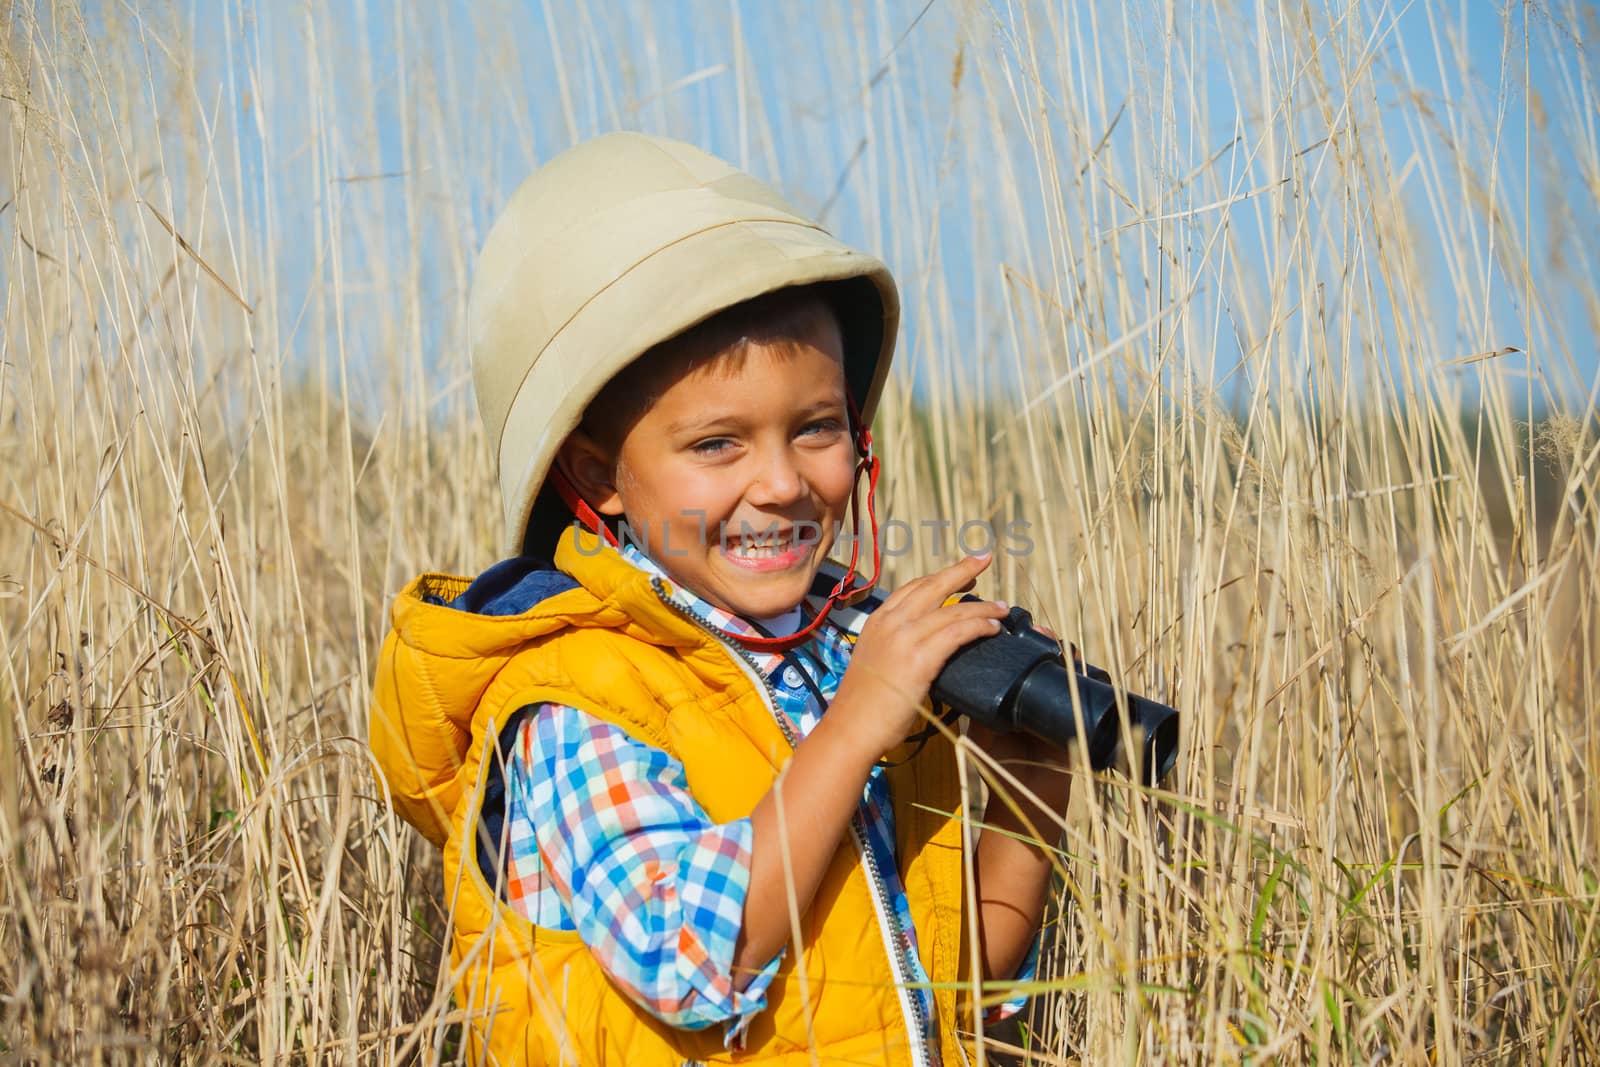 Young boy child playing pretend explorer adventure safari game outdoors with binoculars and bush hat